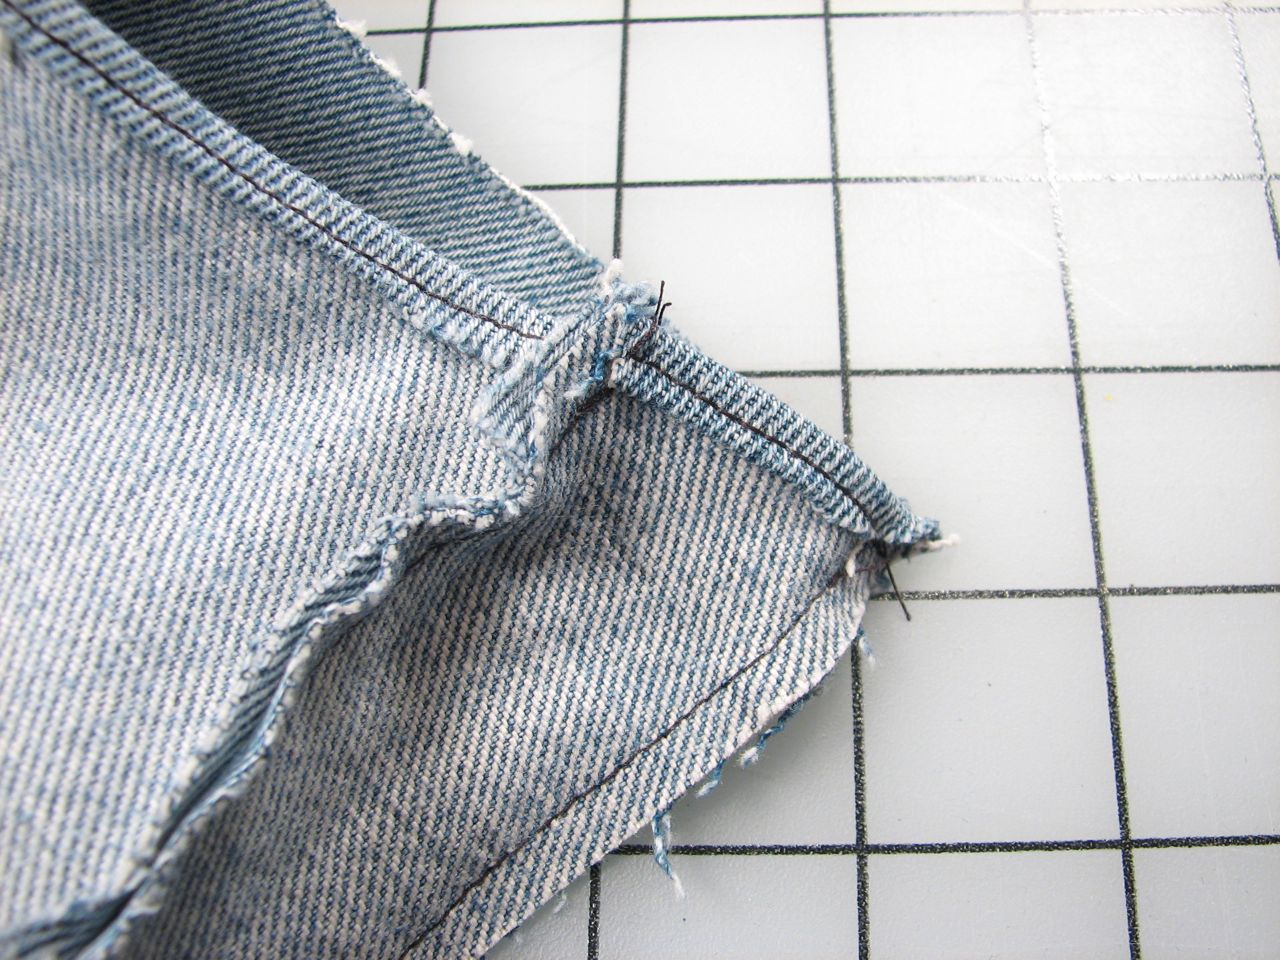 Patching Knee of Jeans : 6 Steps - Instructables